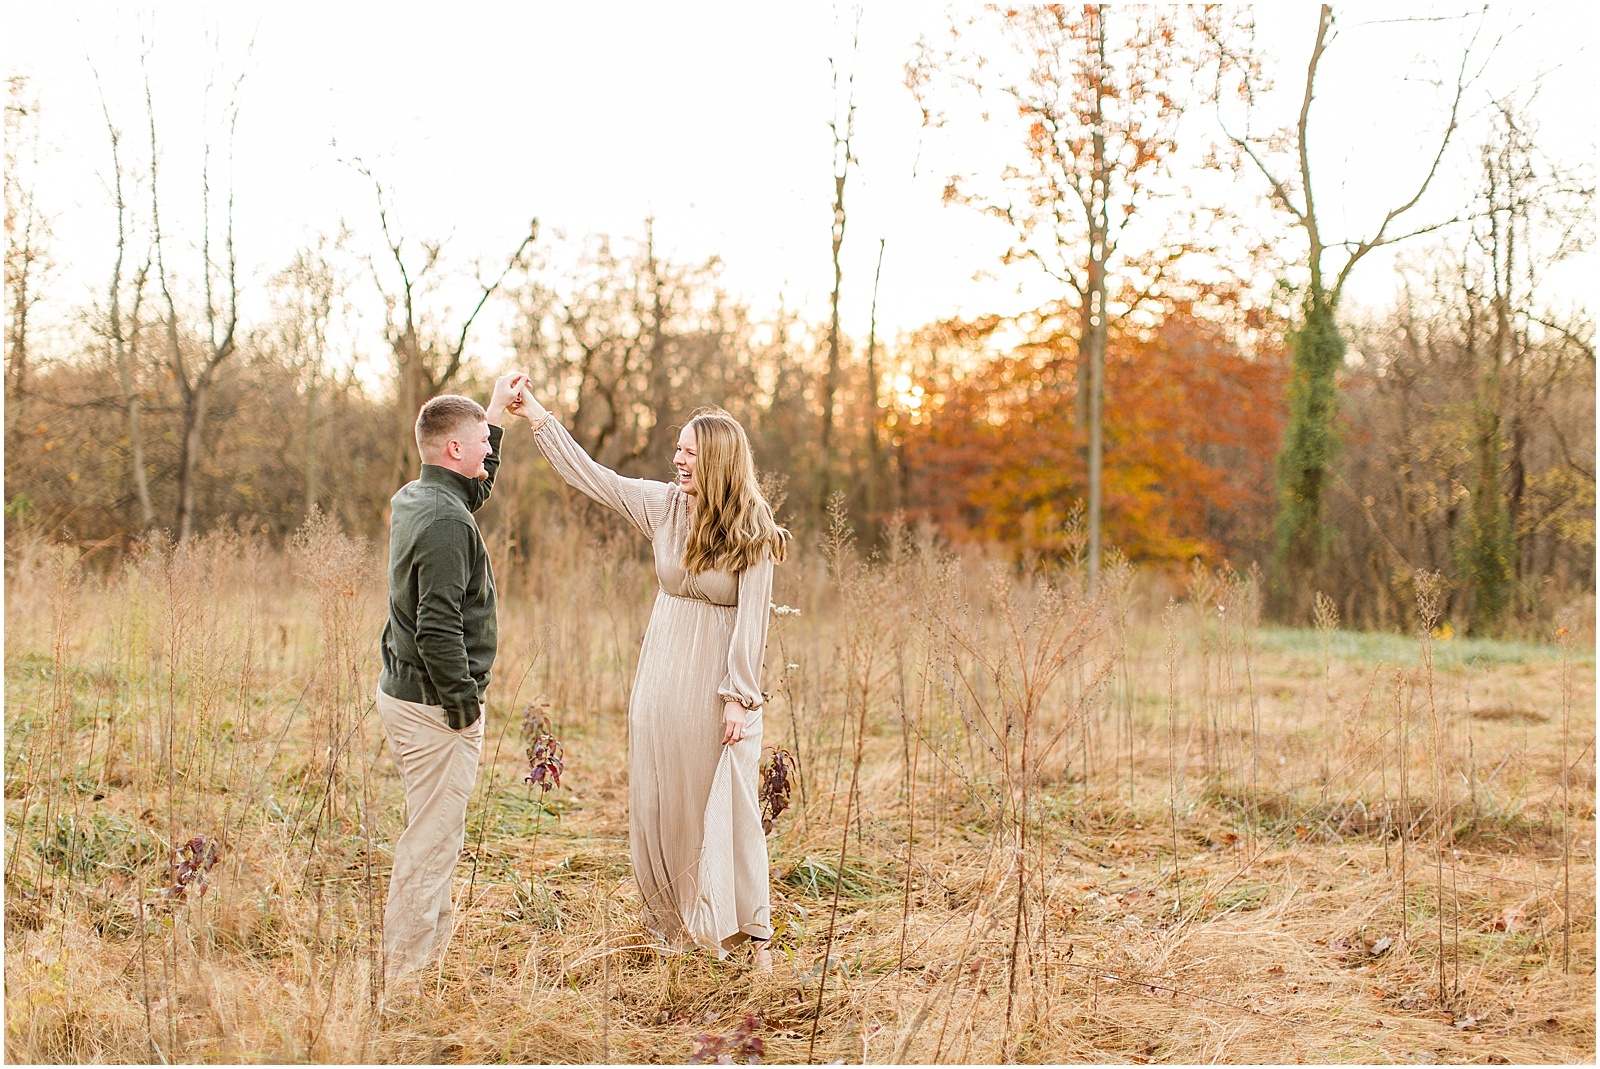 A Fall Southern Indiana Engagement Seesion | Cody and Hannah | Bret and Brandie Photography 048.jpg